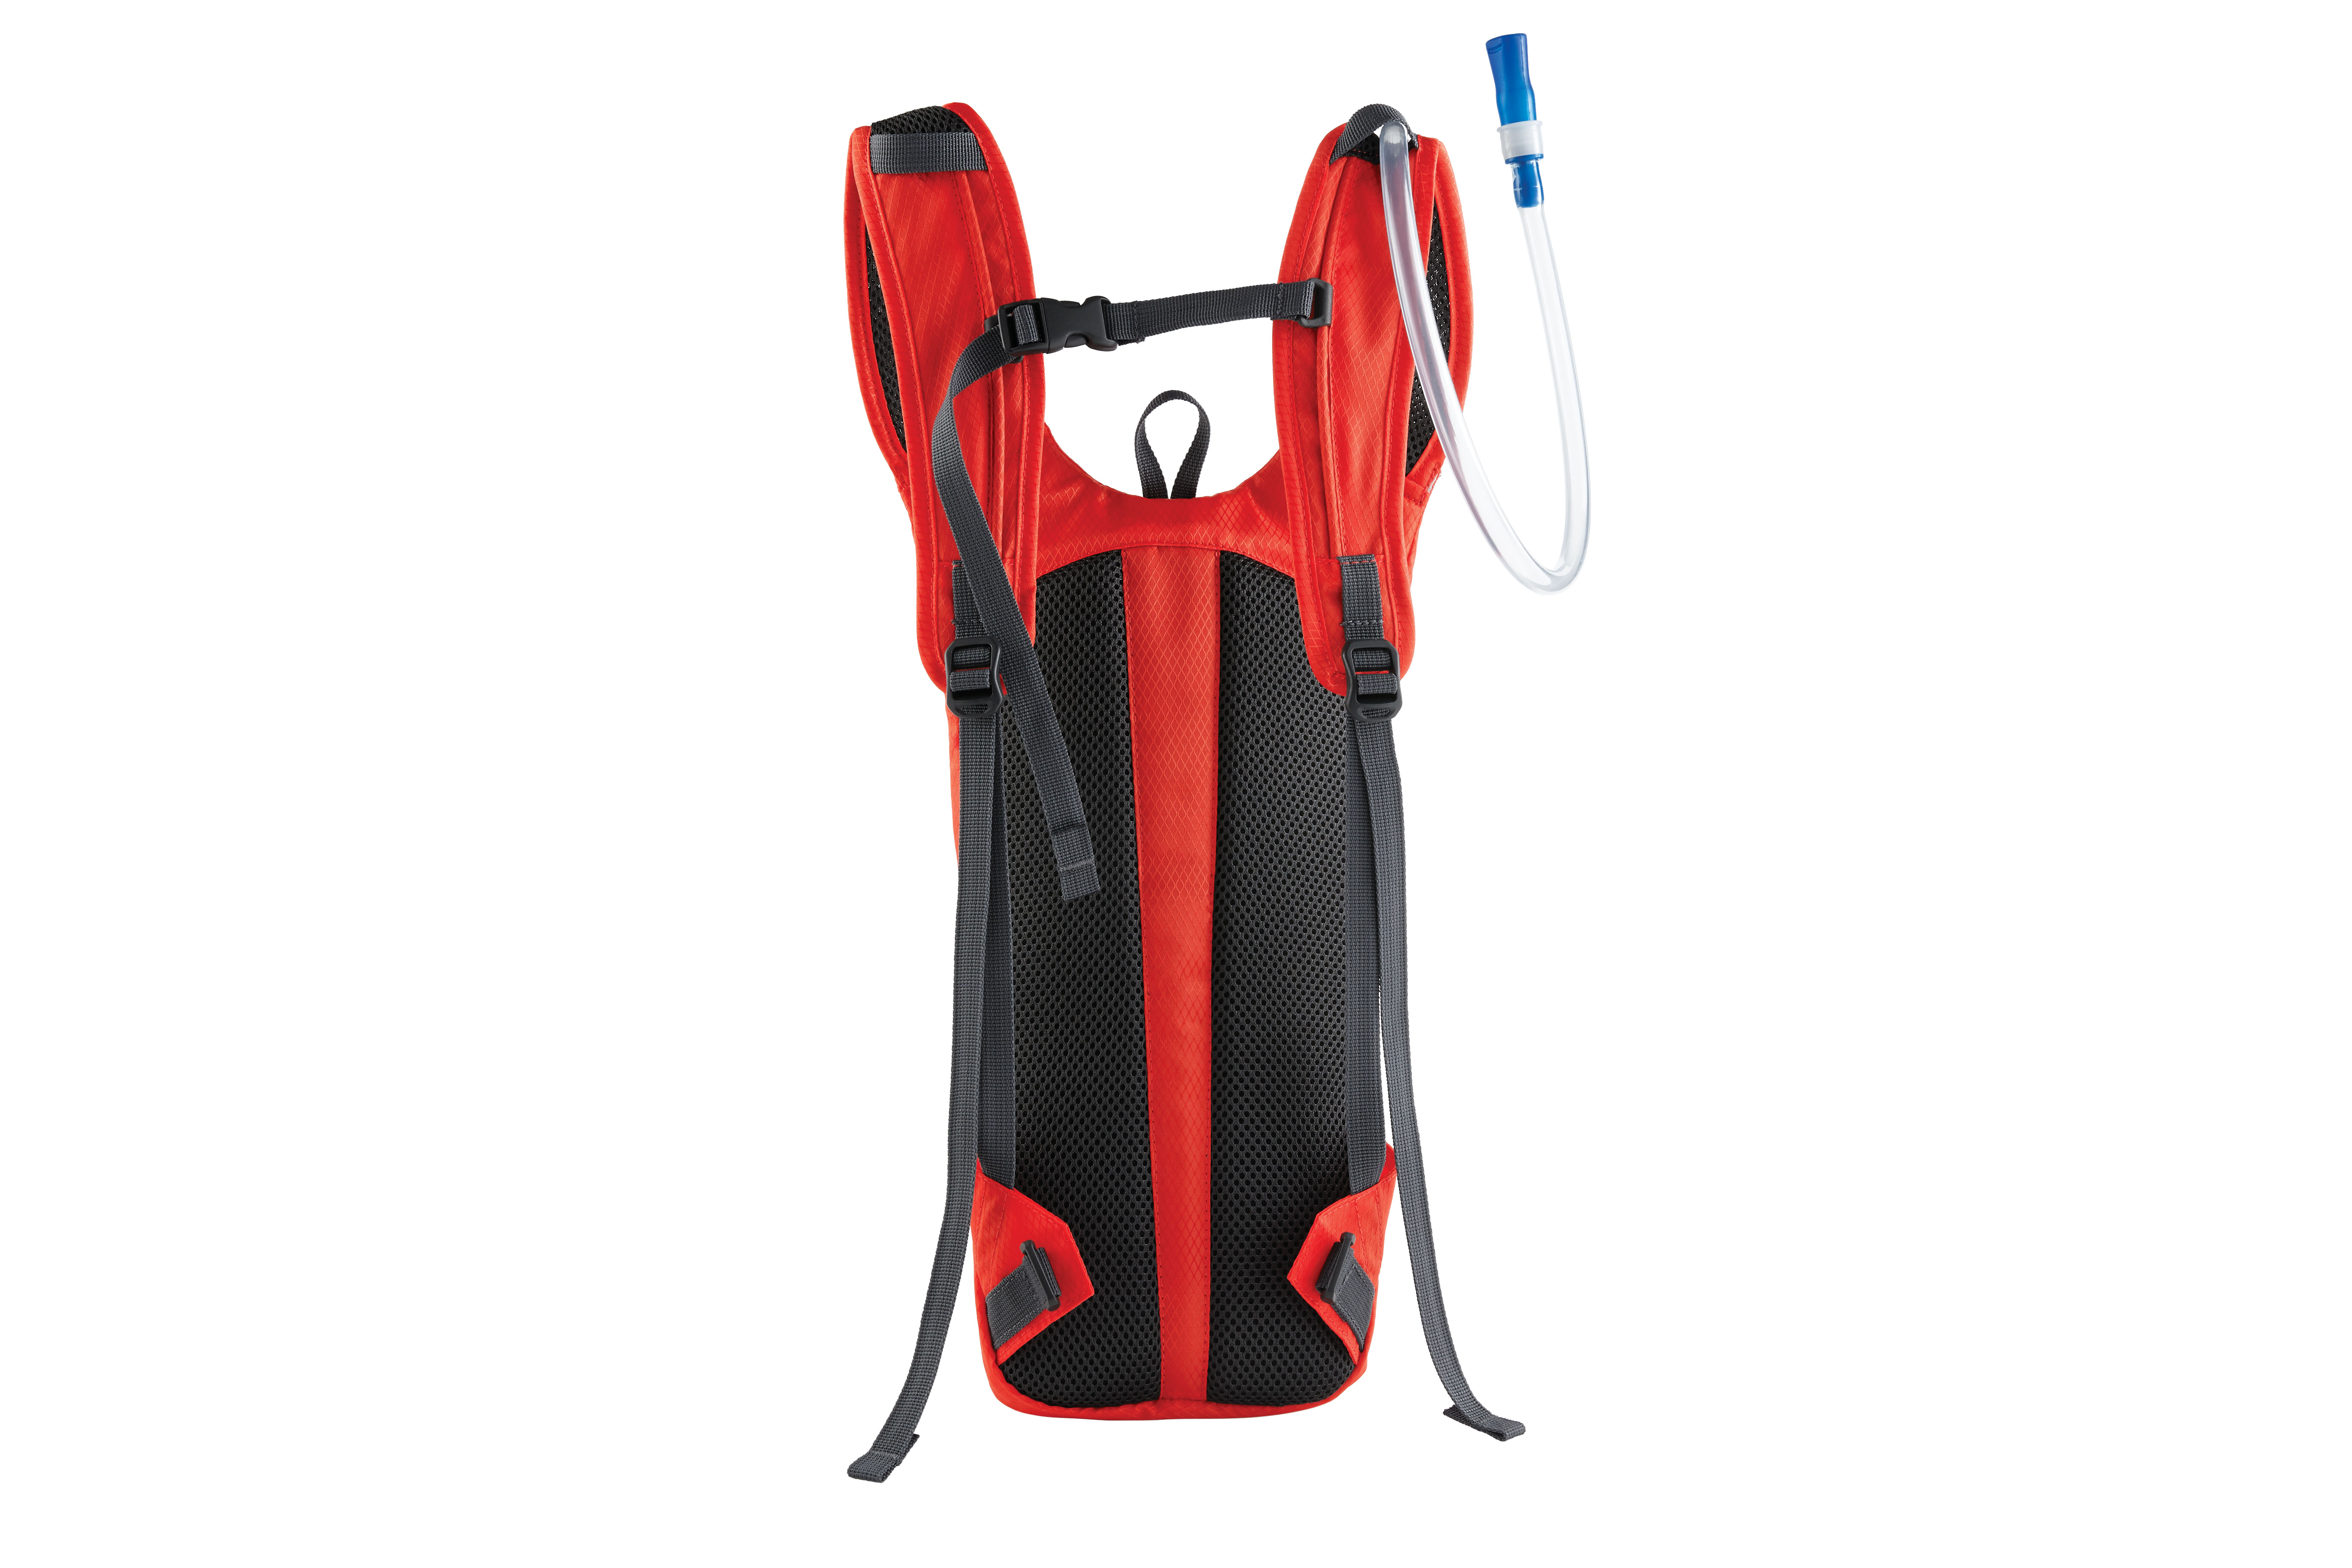 Ozark Trail 5 Ltr Adult Hydration Hiking Backpack, Unisex, Red - image 5 of 5